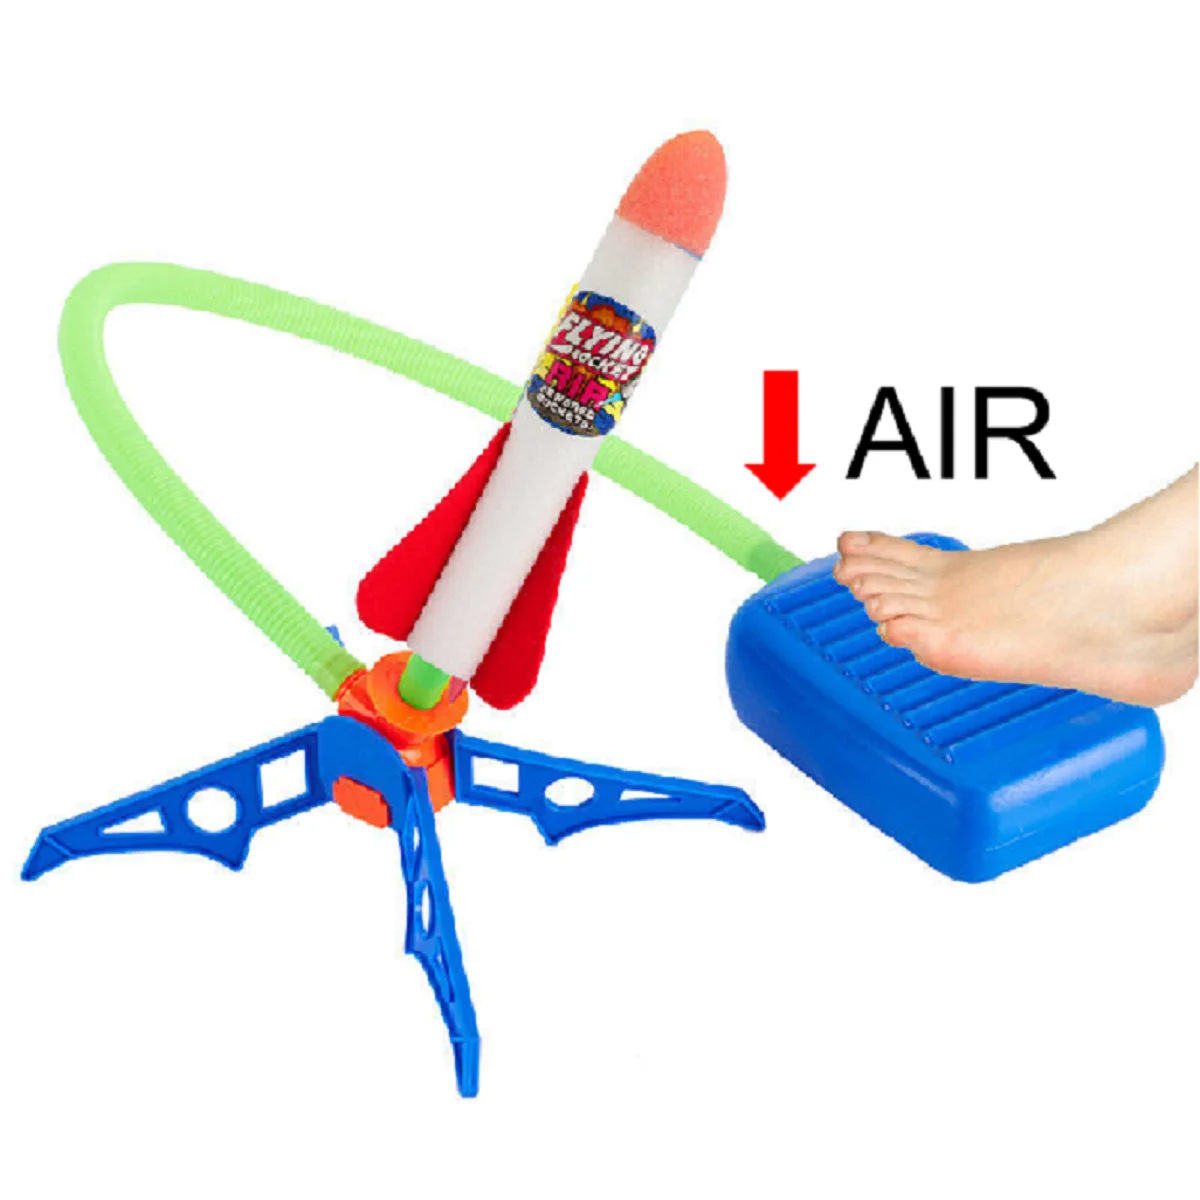 kids rocket launcher step pump power air pressed stomp outdoor family games skyrocket birthday gifts sports toys for children free global shipping